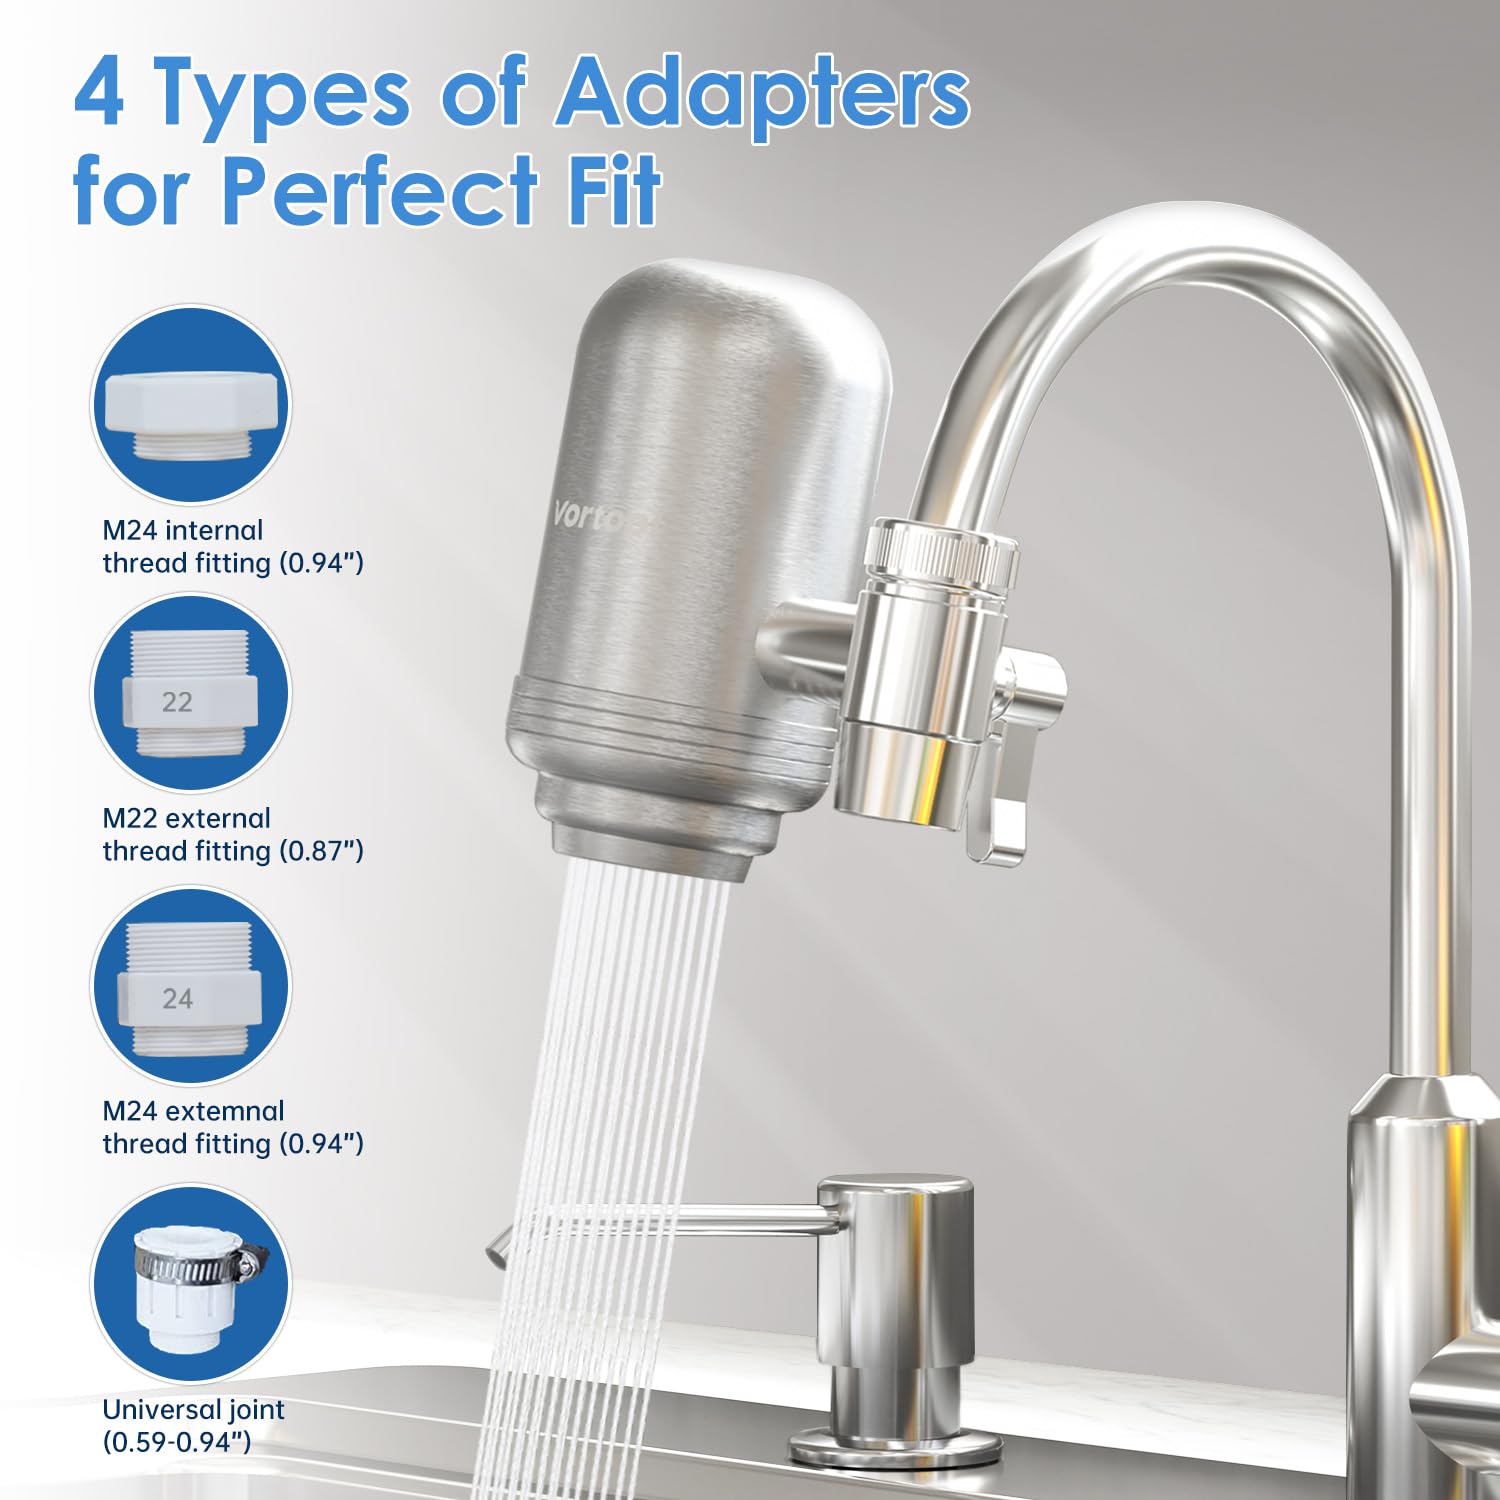  T2 500G Stainless Steel Faucet Water Filter for Sink, Vortopt